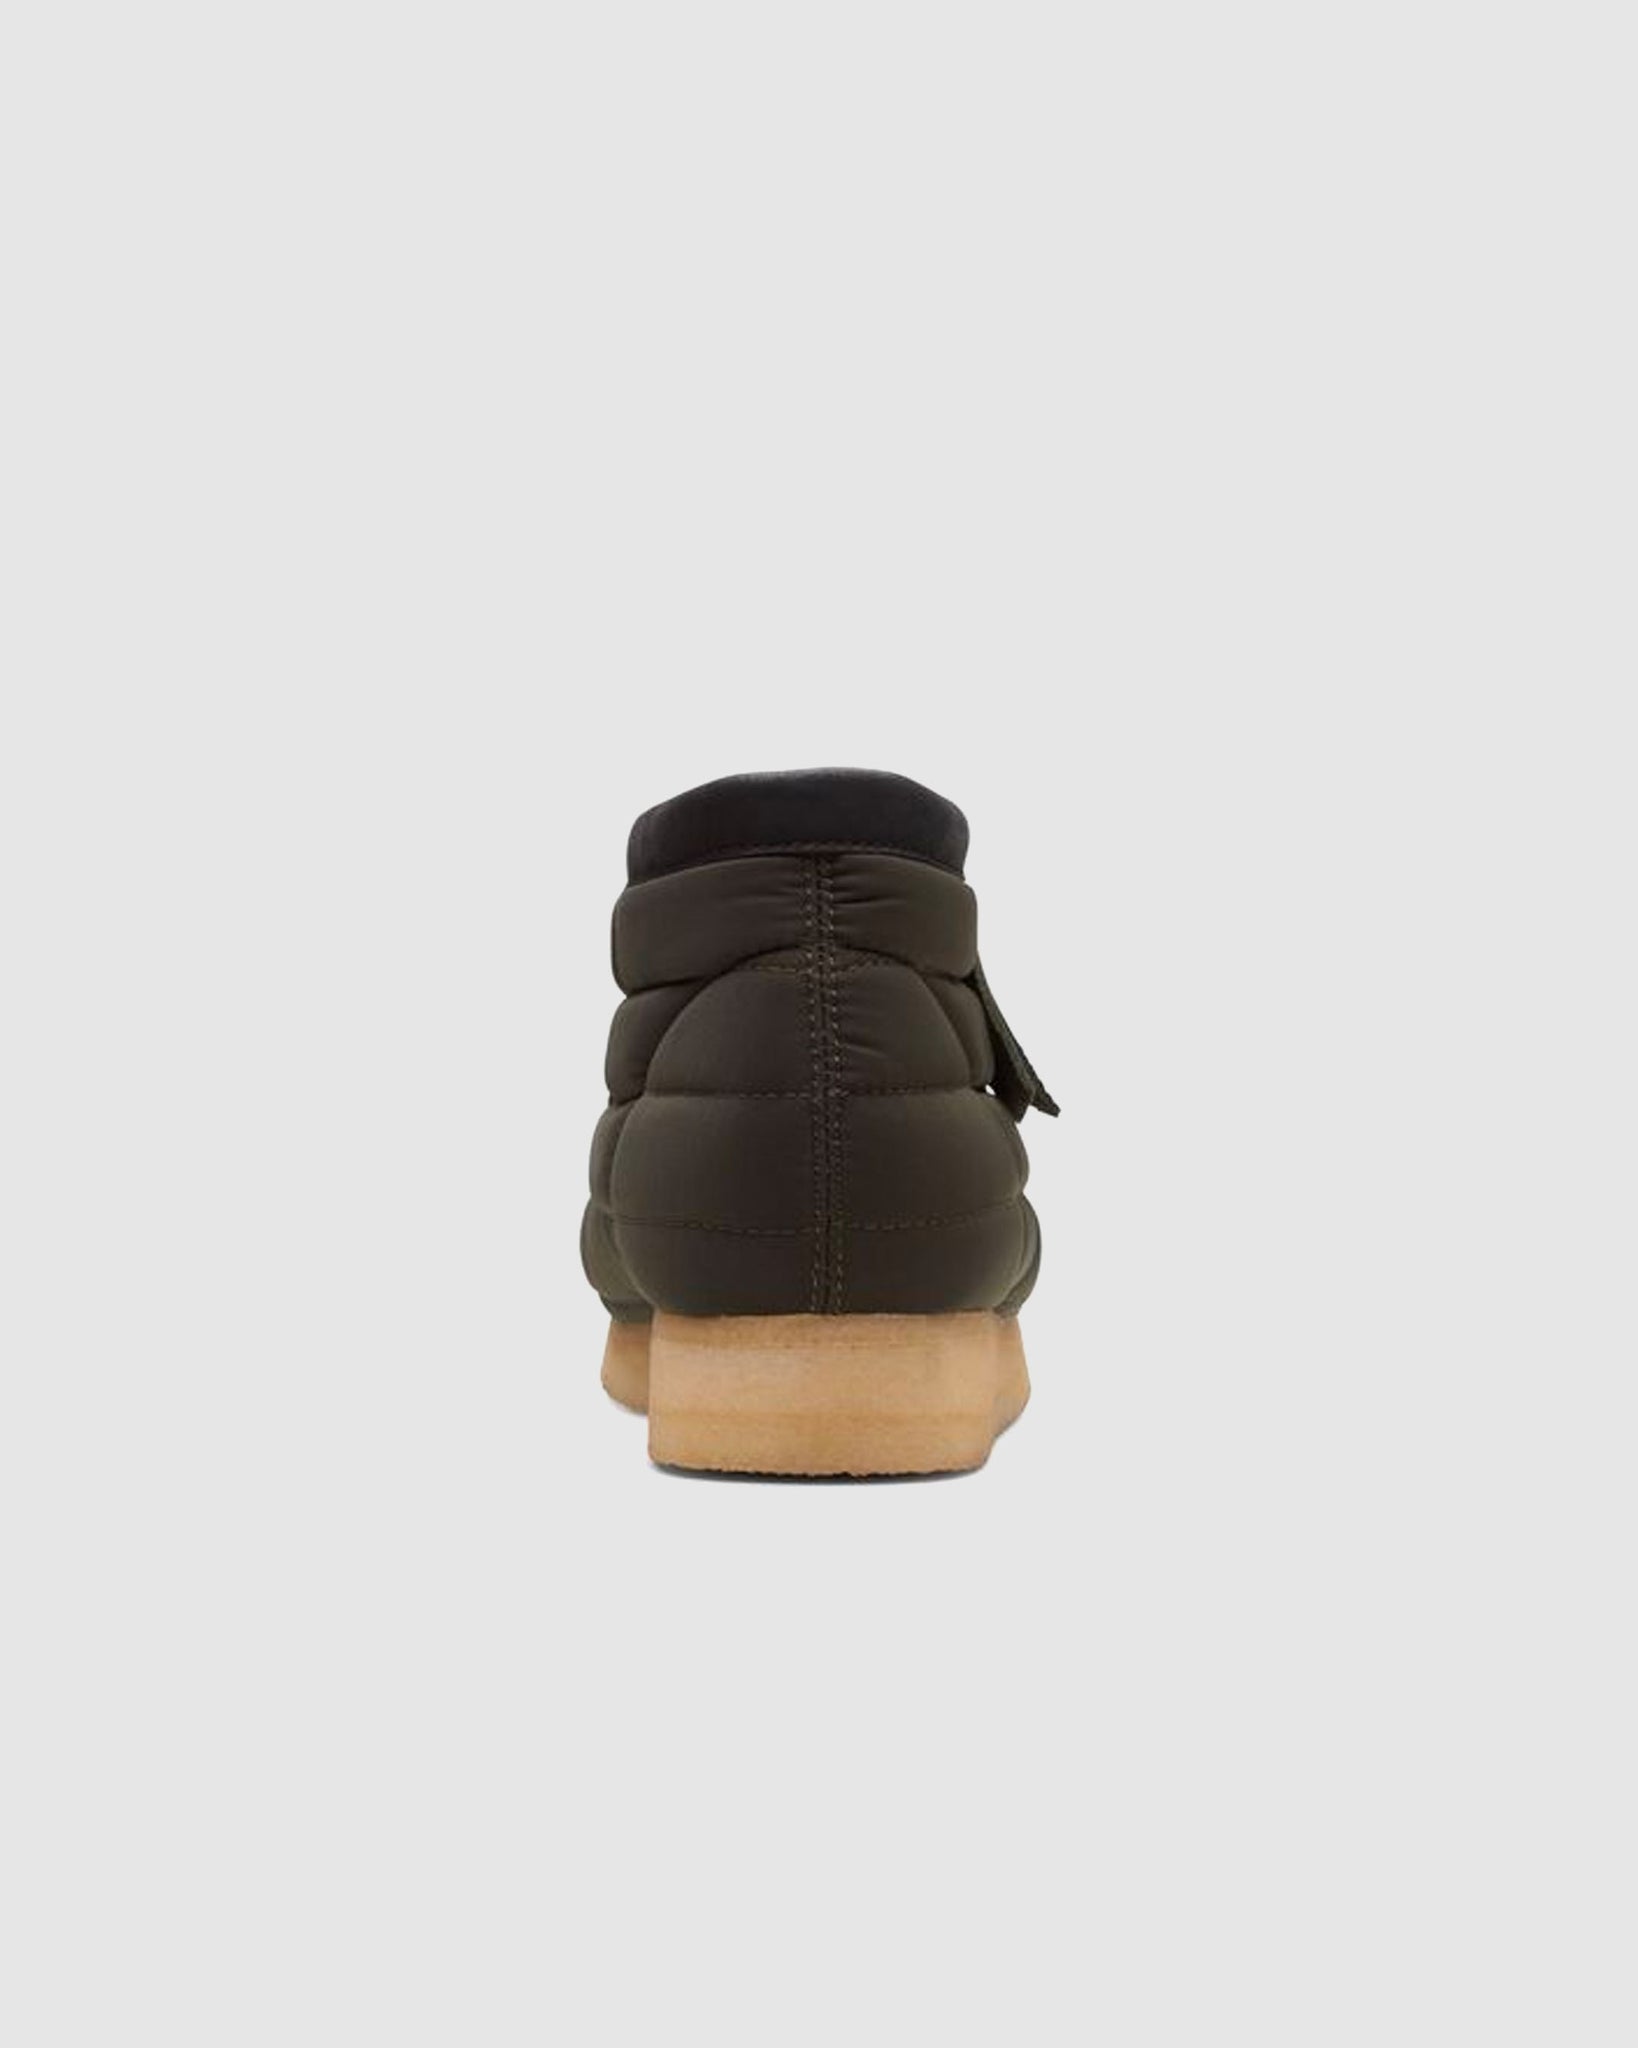 Wallabe Boot - Khaki Quilted